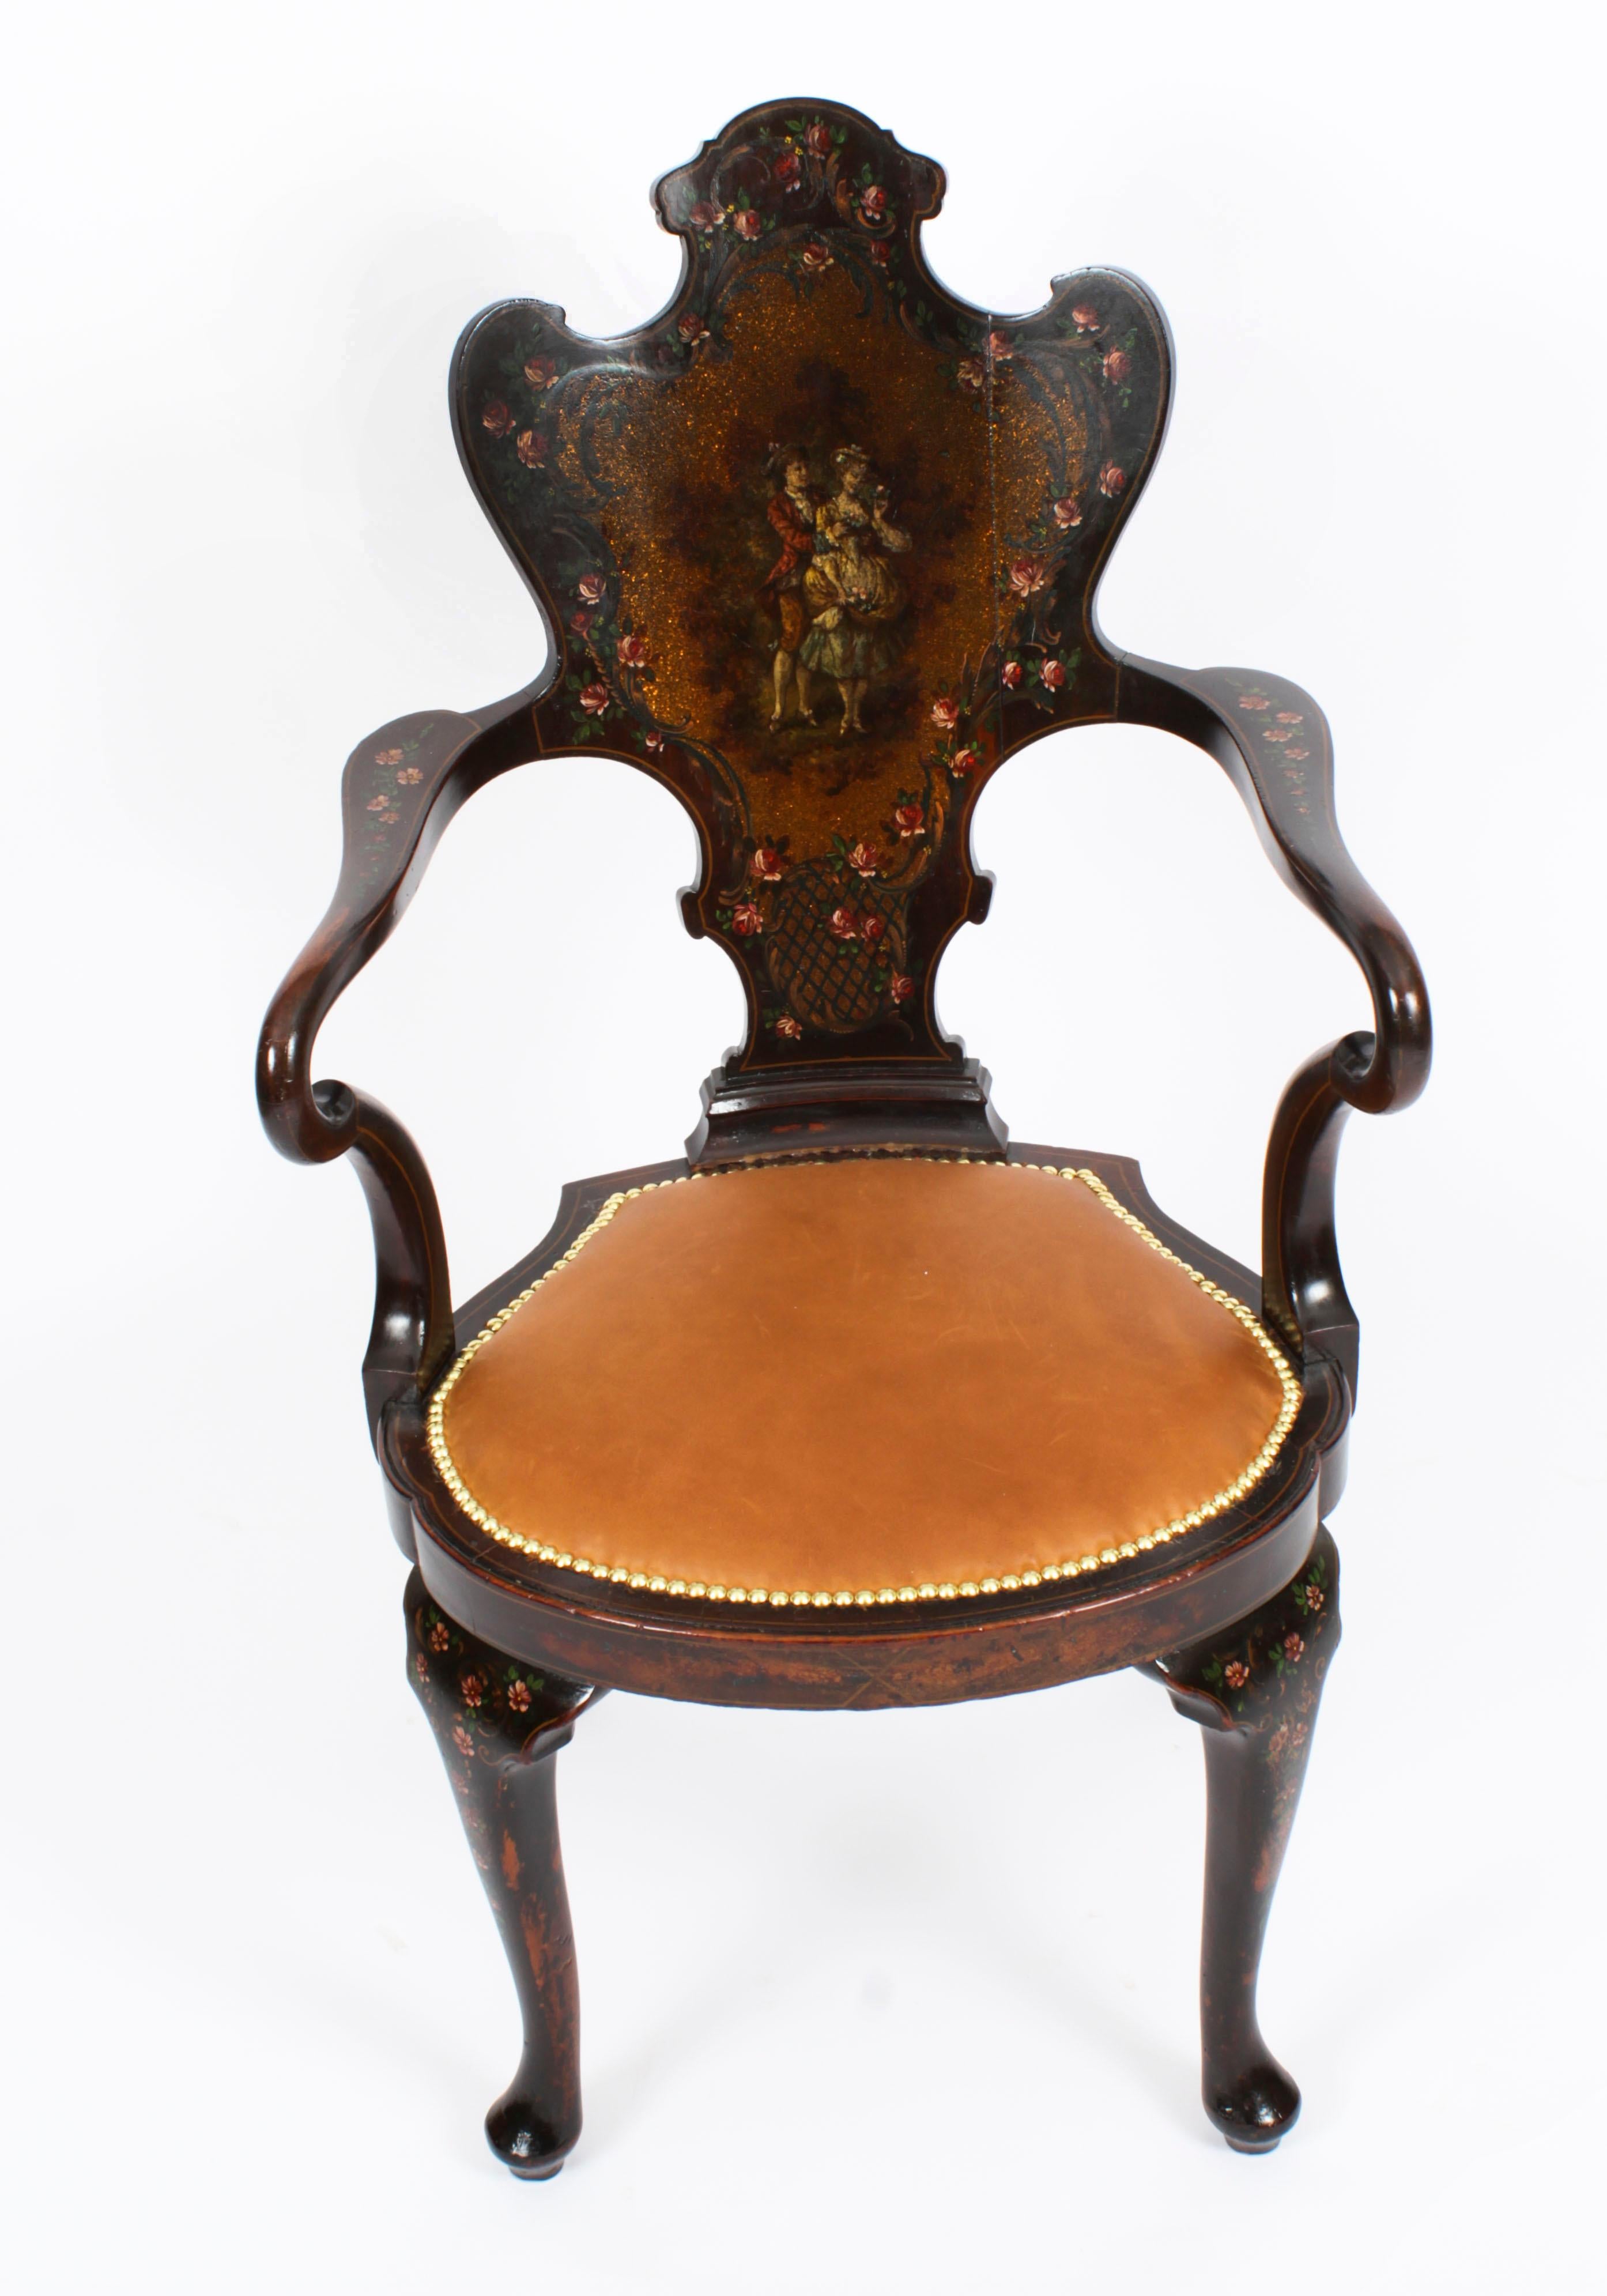 A superb French walnut Vernis Martin salon open armchair, Circa 1870 in date.
The shield shaped back painted with a scene of lovers in a garden, with rose decoration to the arms. With brass plaque for the renowned Victorian retailer Druce & Co., of